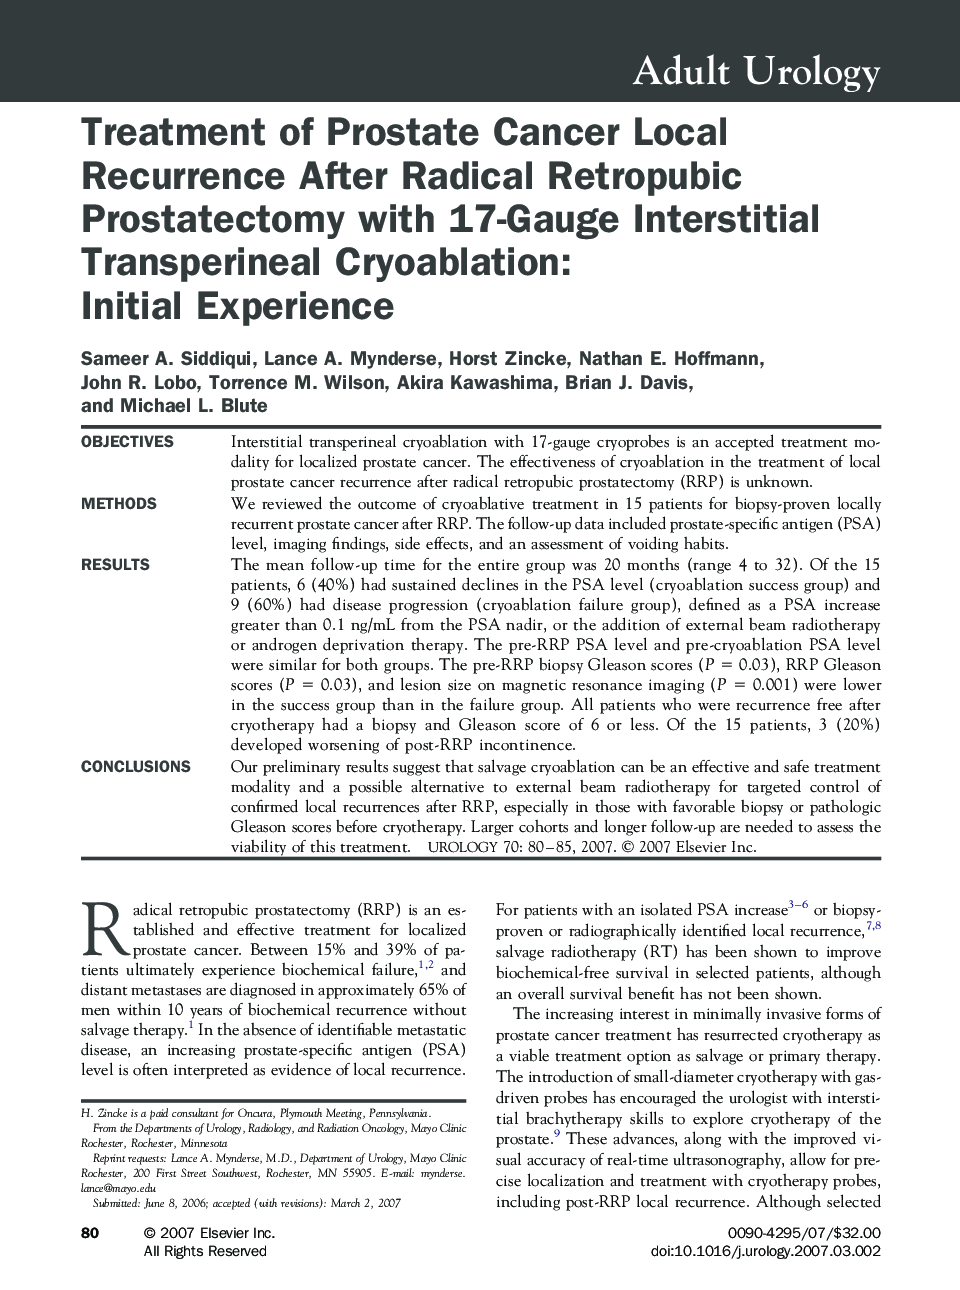 Treatment of Prostate Cancer Local Recurrence After Radical Retropubic Prostatectomy with 17-Gauge Interstitial Transperineal Cryoablation: Initial Experience